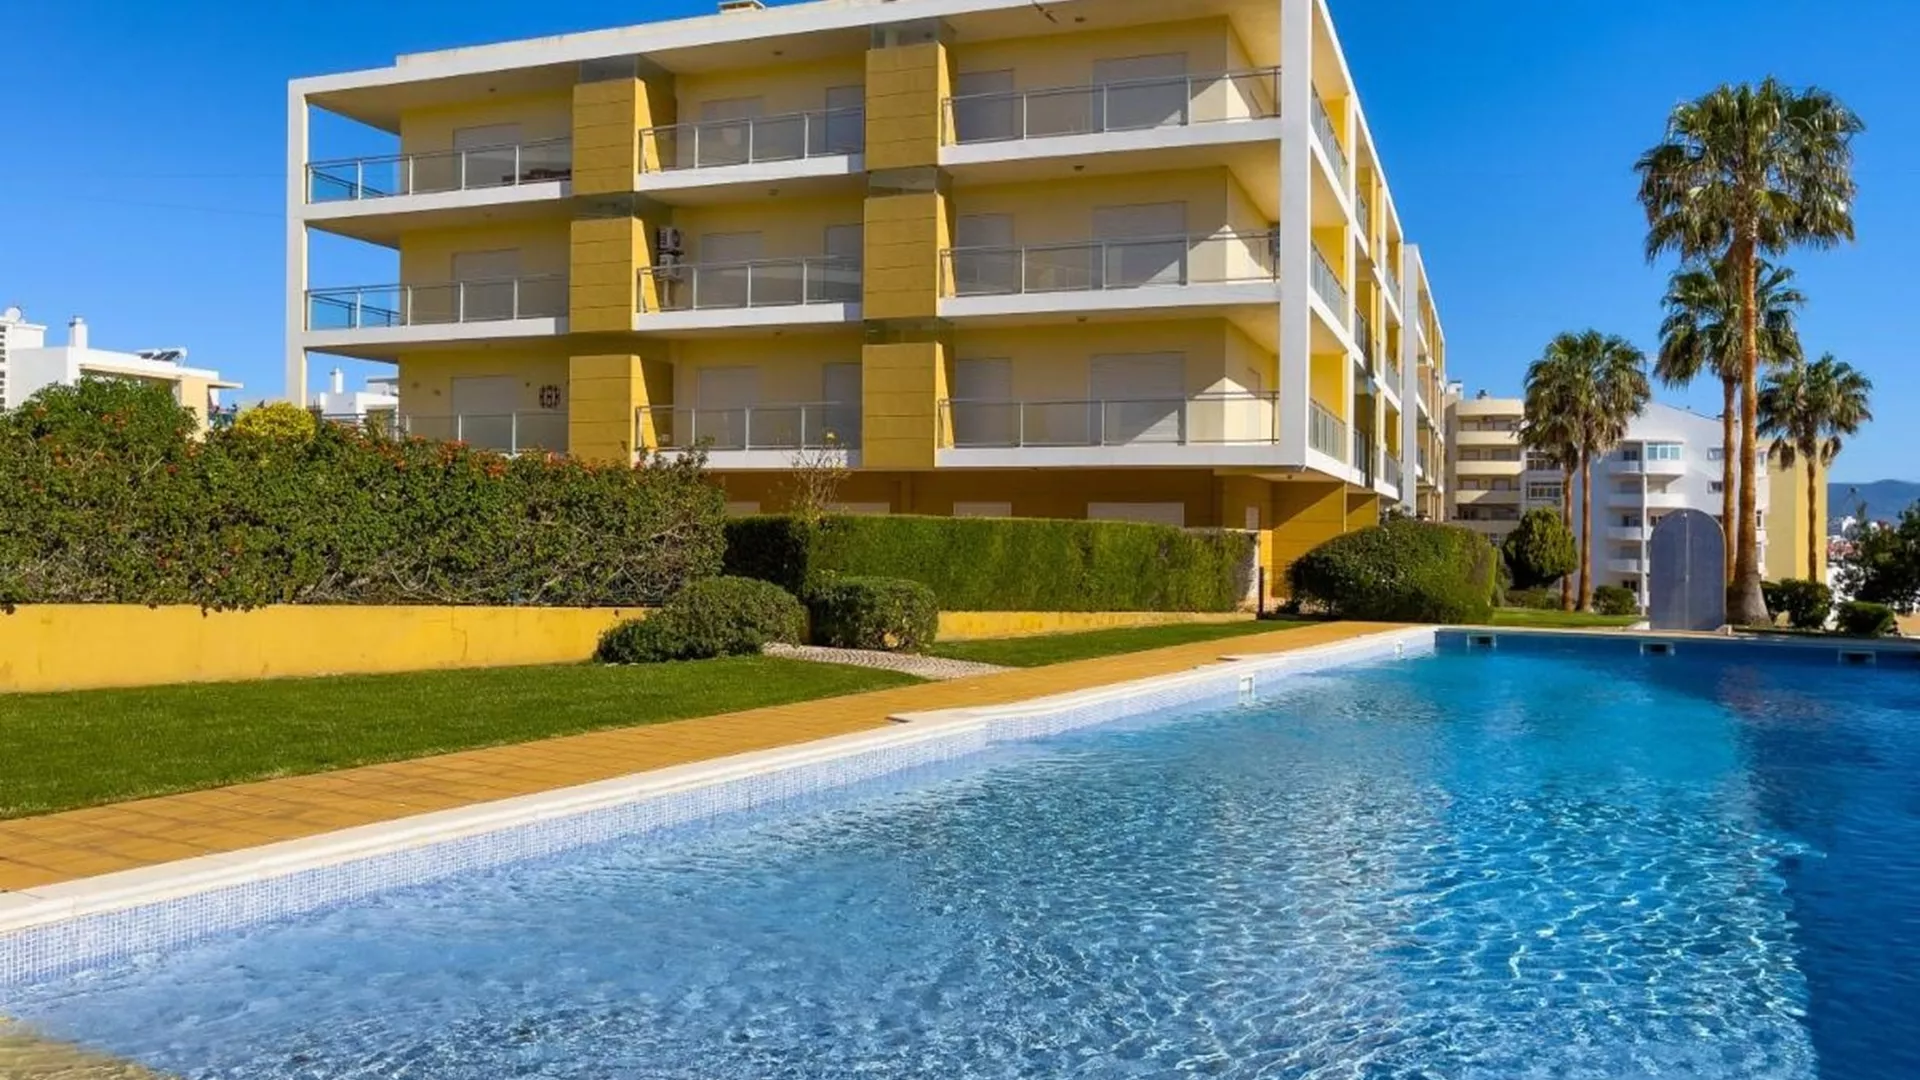 1 bedroom apartment with terrace in private condominium with swimming pool, in Portimão